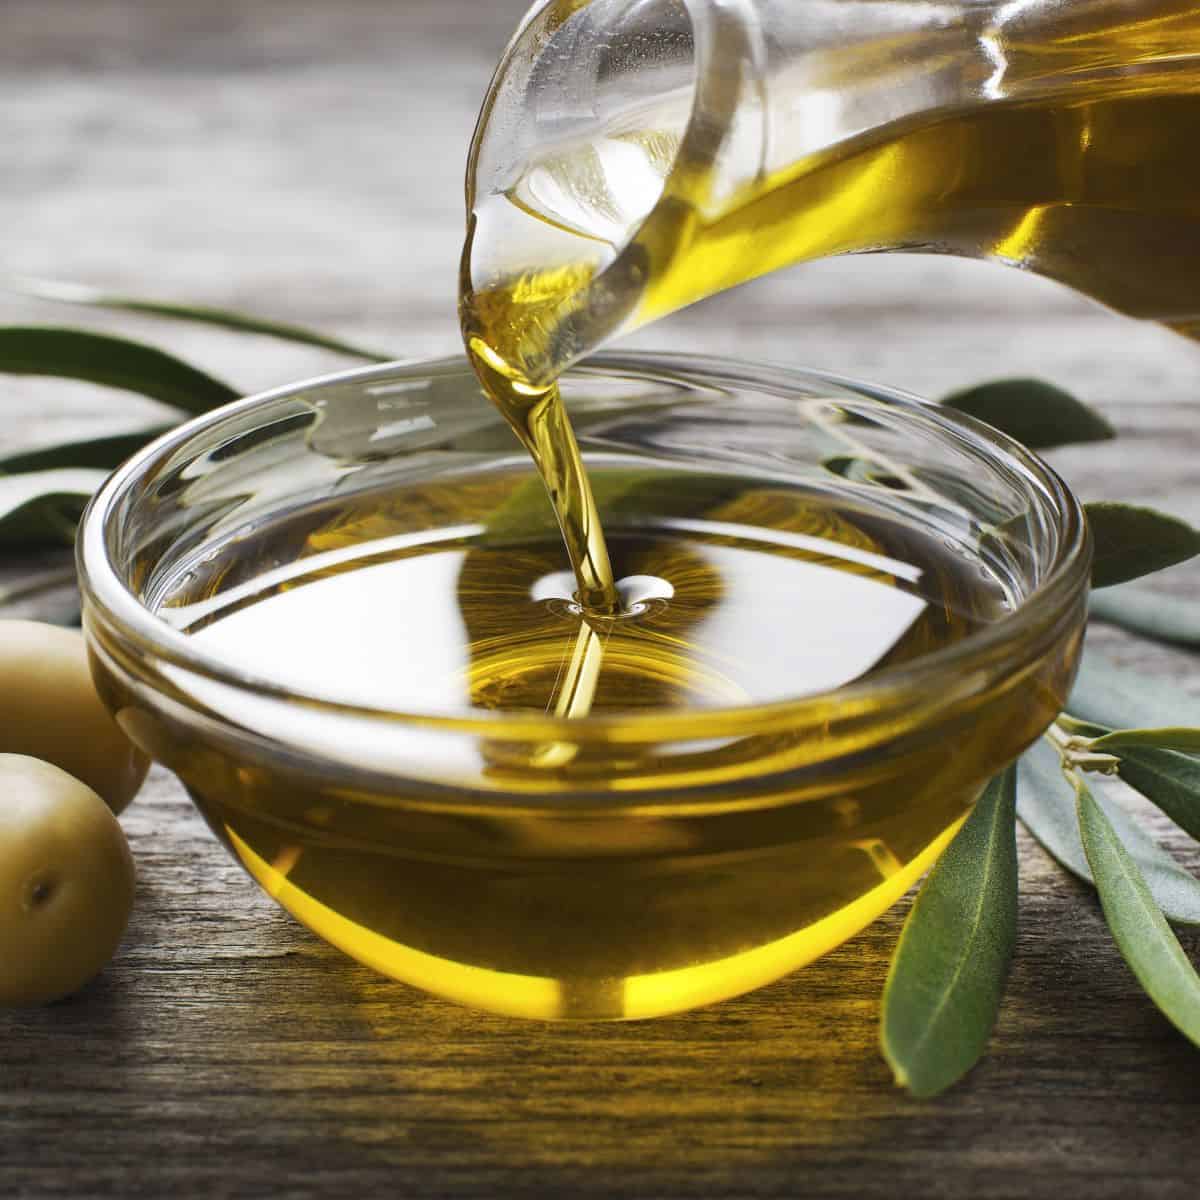 baking with olive oil.